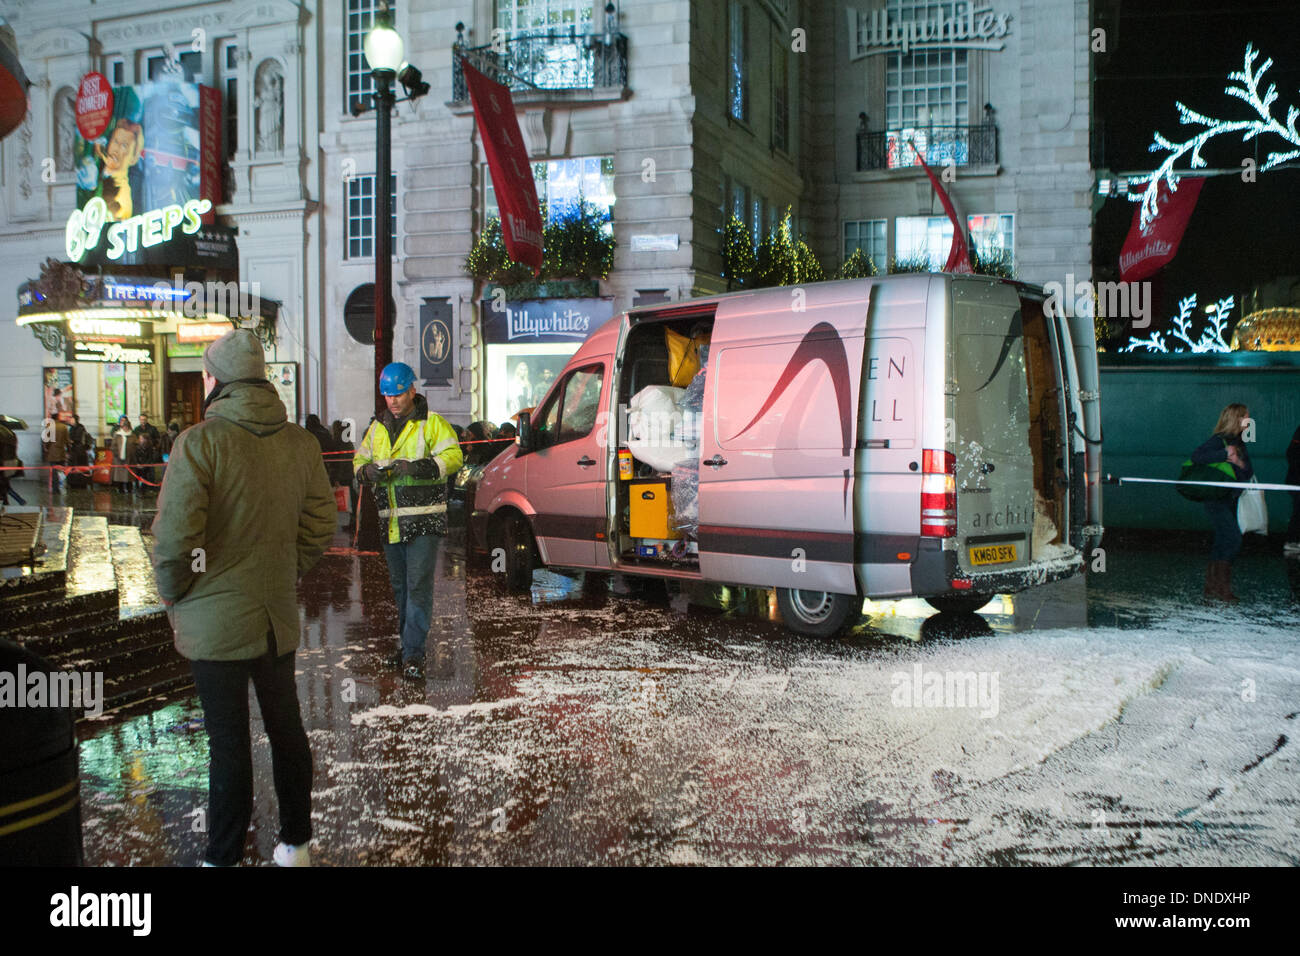 London, UK. 23rd Dec, 2013. Giant snow globe around Eros in Piccadilly Circus in London deflates because of the high winds. The stormy weather has caused disruption across the UK. Credit:  martyn wheatley/Alamy Live News Stock Photo